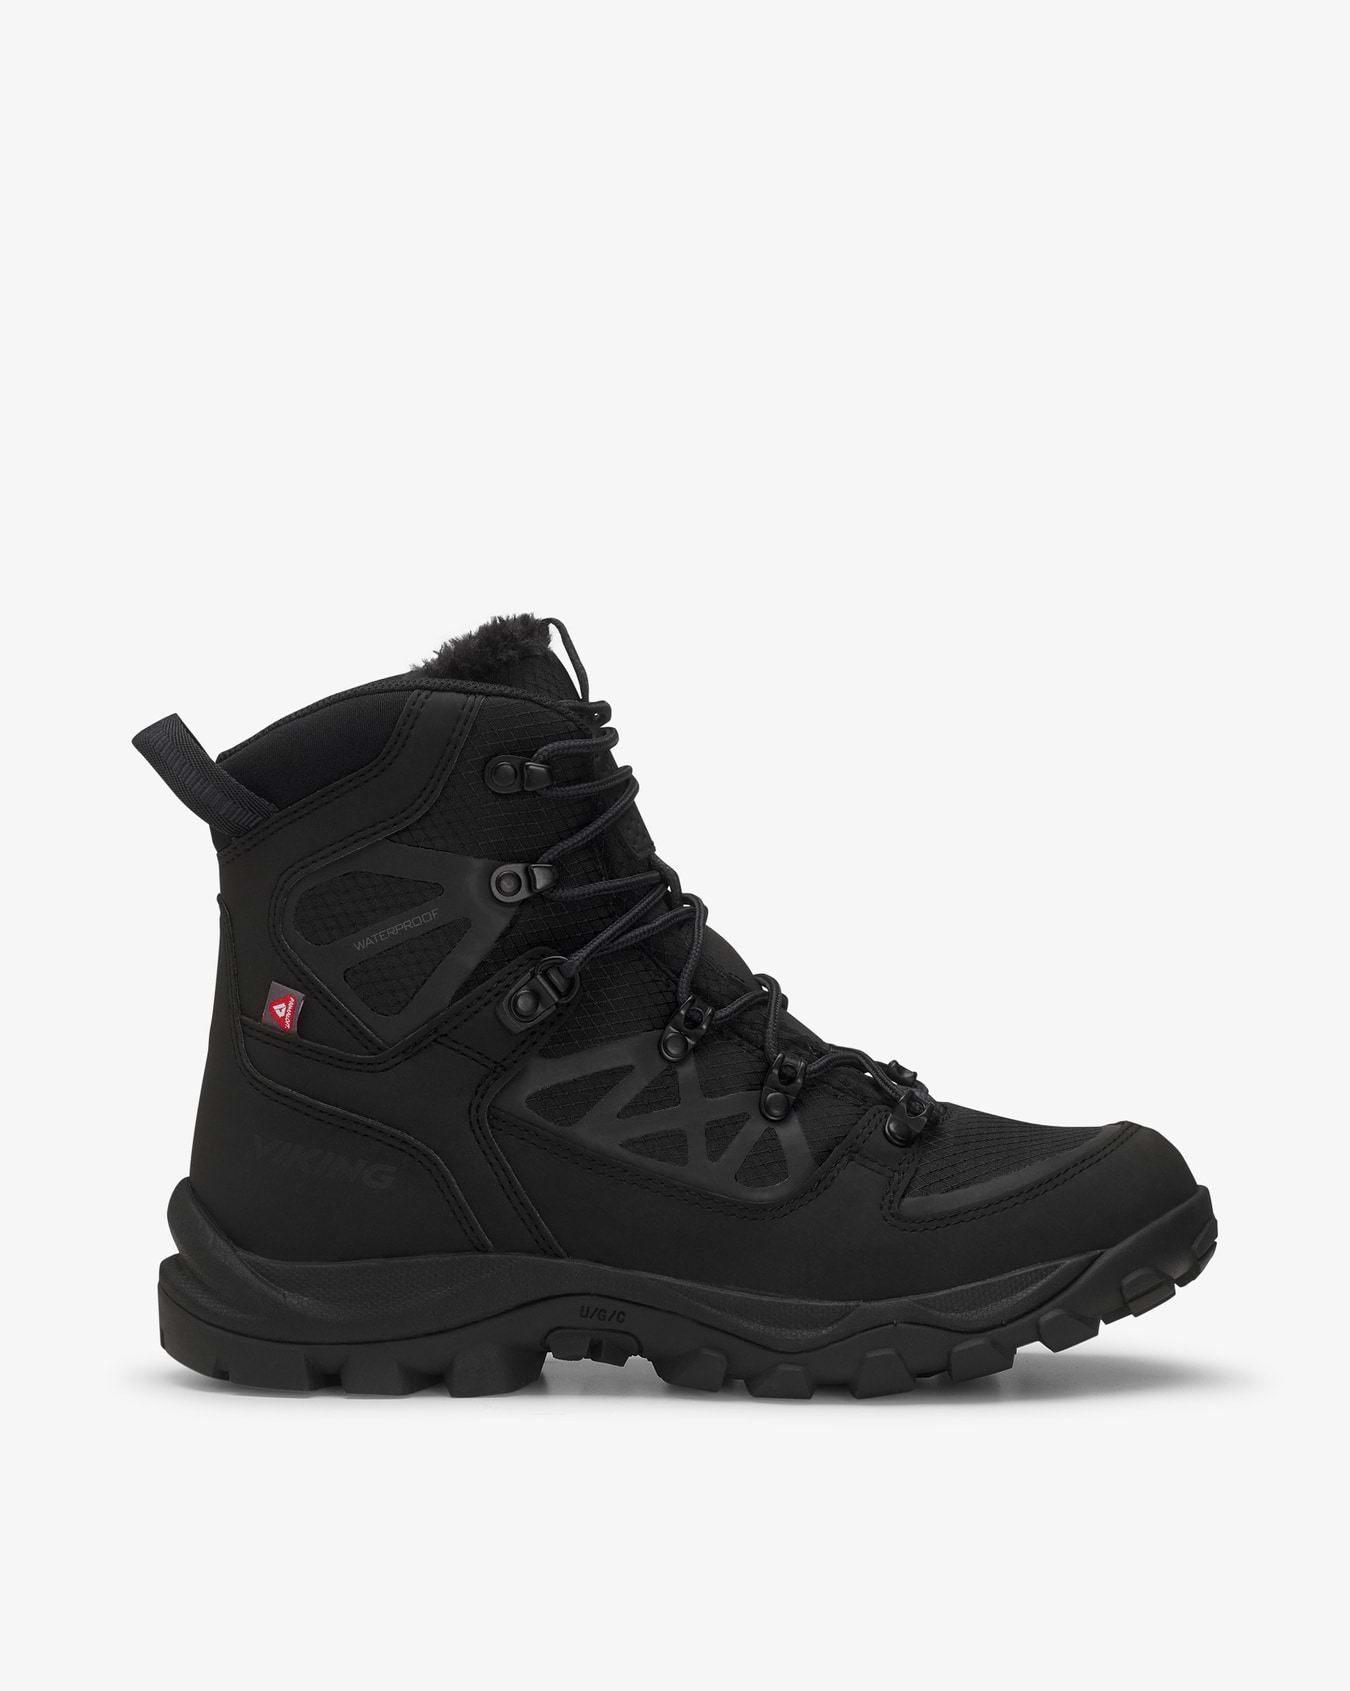 Constrictor High WP M Black Hiking